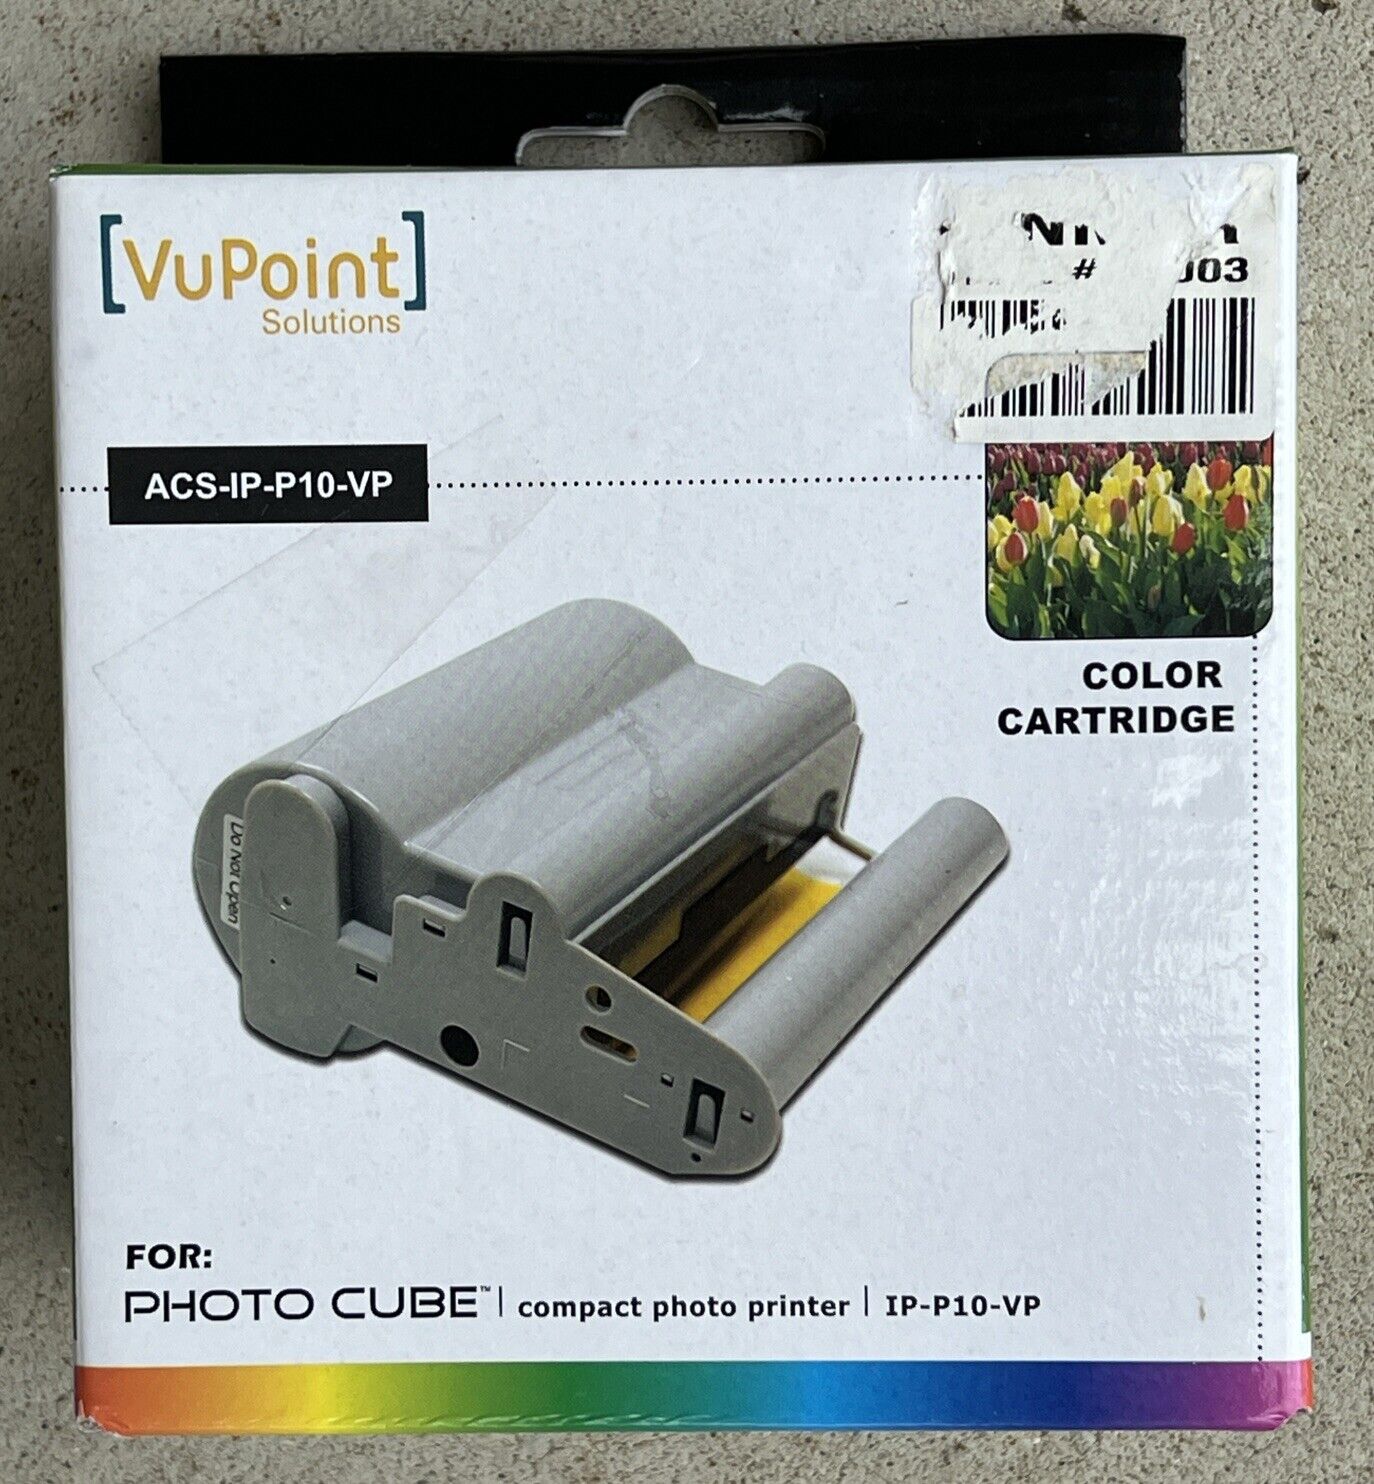 VuPoint Solutions ACS-IP-P10-VP Color Ink Cartridge For Photo Cube New Sealed